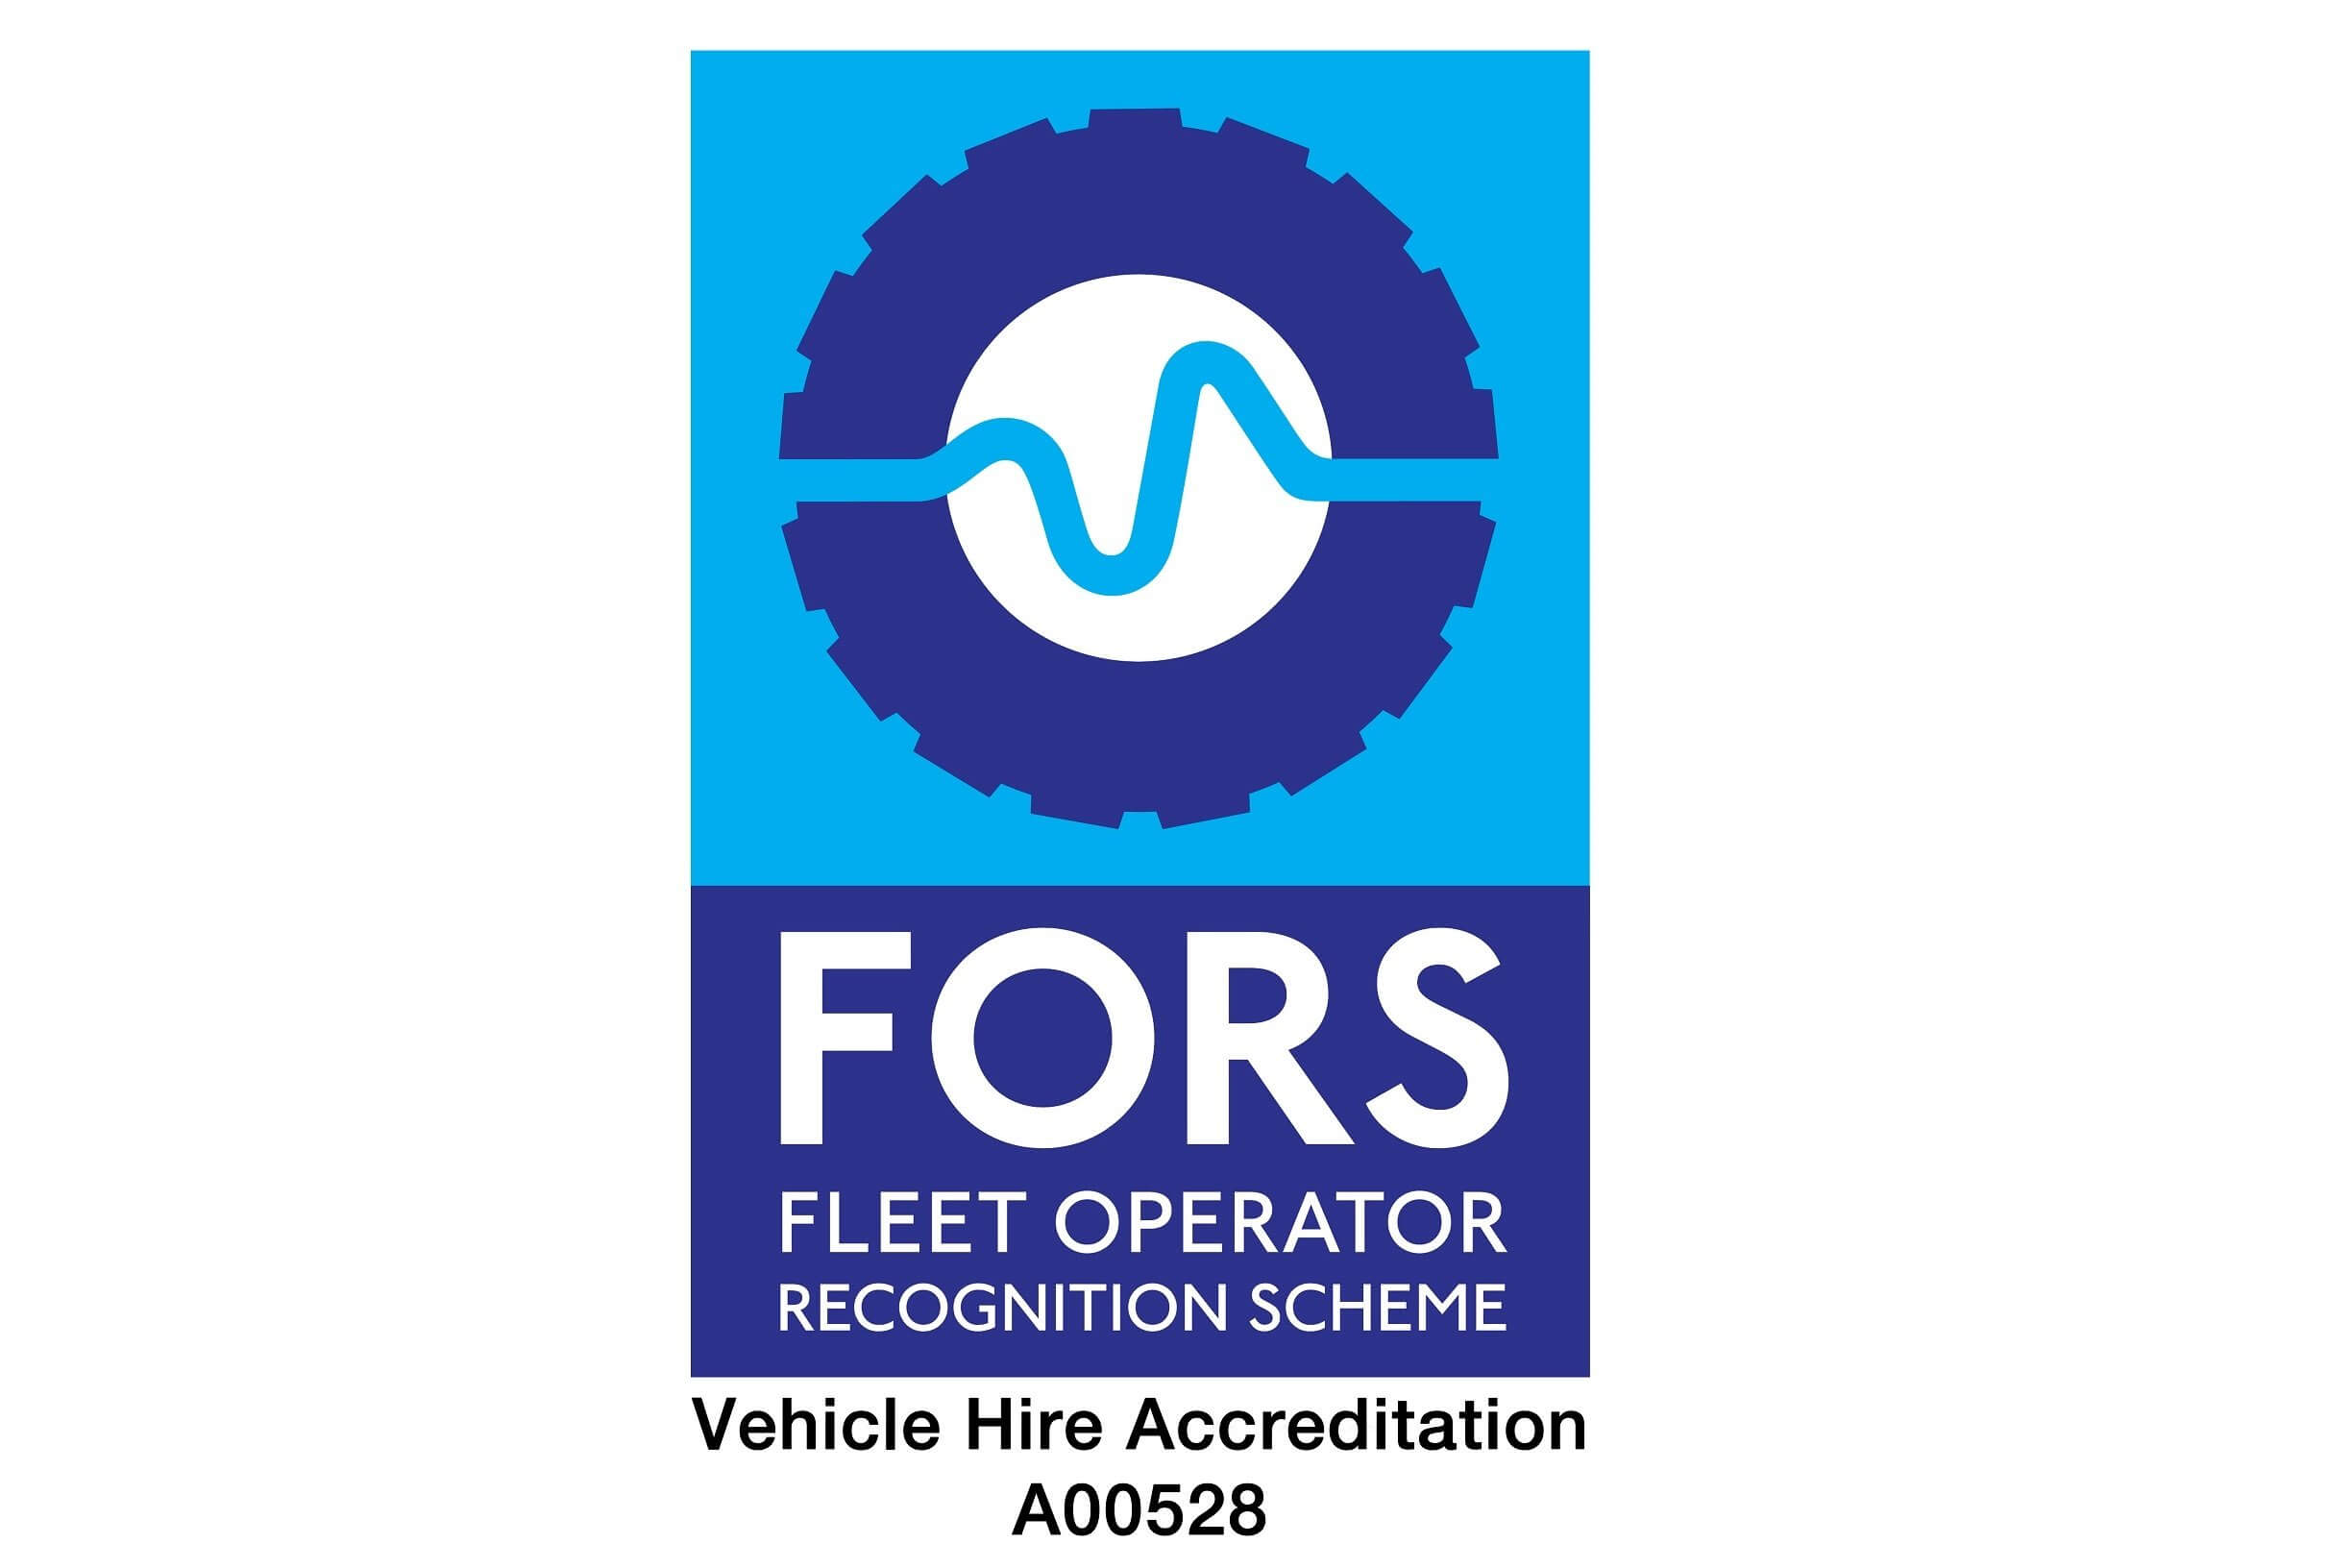 FORS Silver Vehicle Hire Provider Accredited